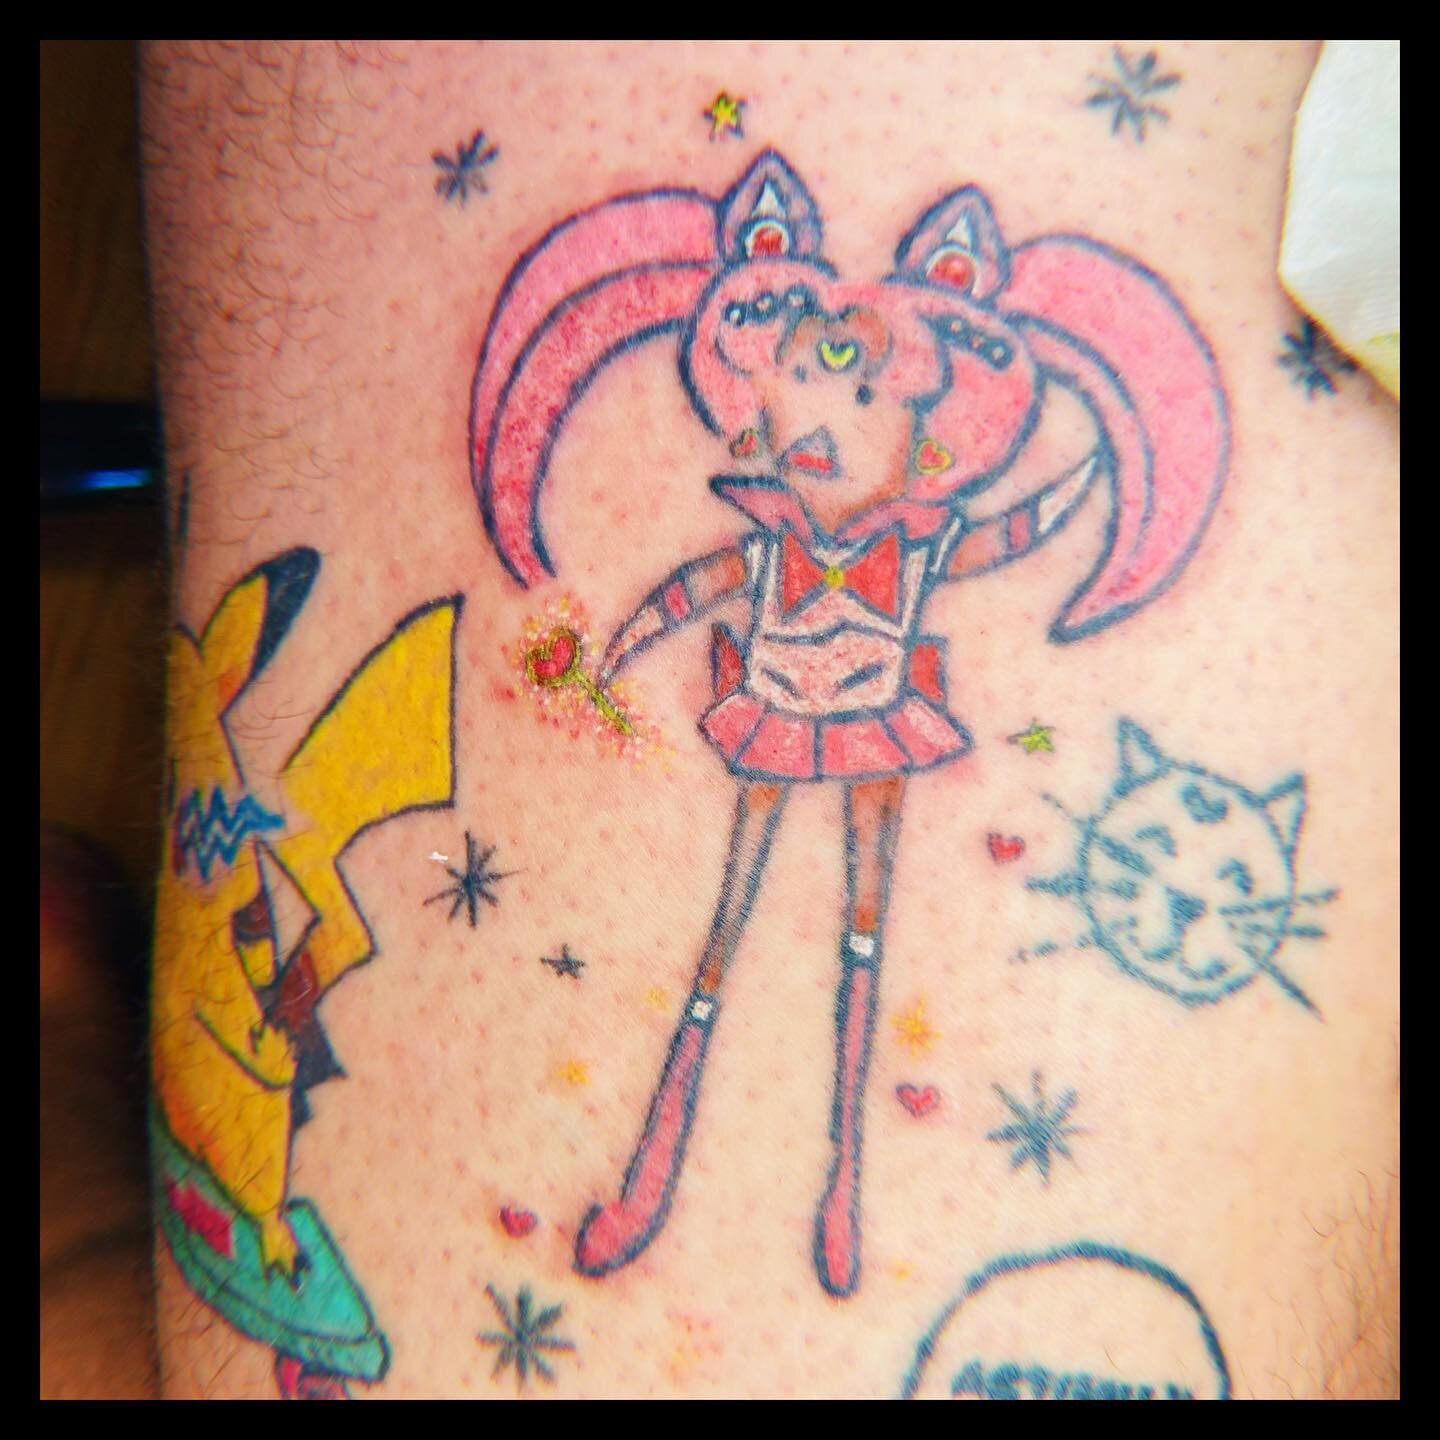 PINK SUGAR HEART ATTACK!!!!
💕🌸✨💫
This lil Sailor Chibi Moon has taken quite the journey! Originally drawn on the back of receipt by @obeegirlkenobi 💕